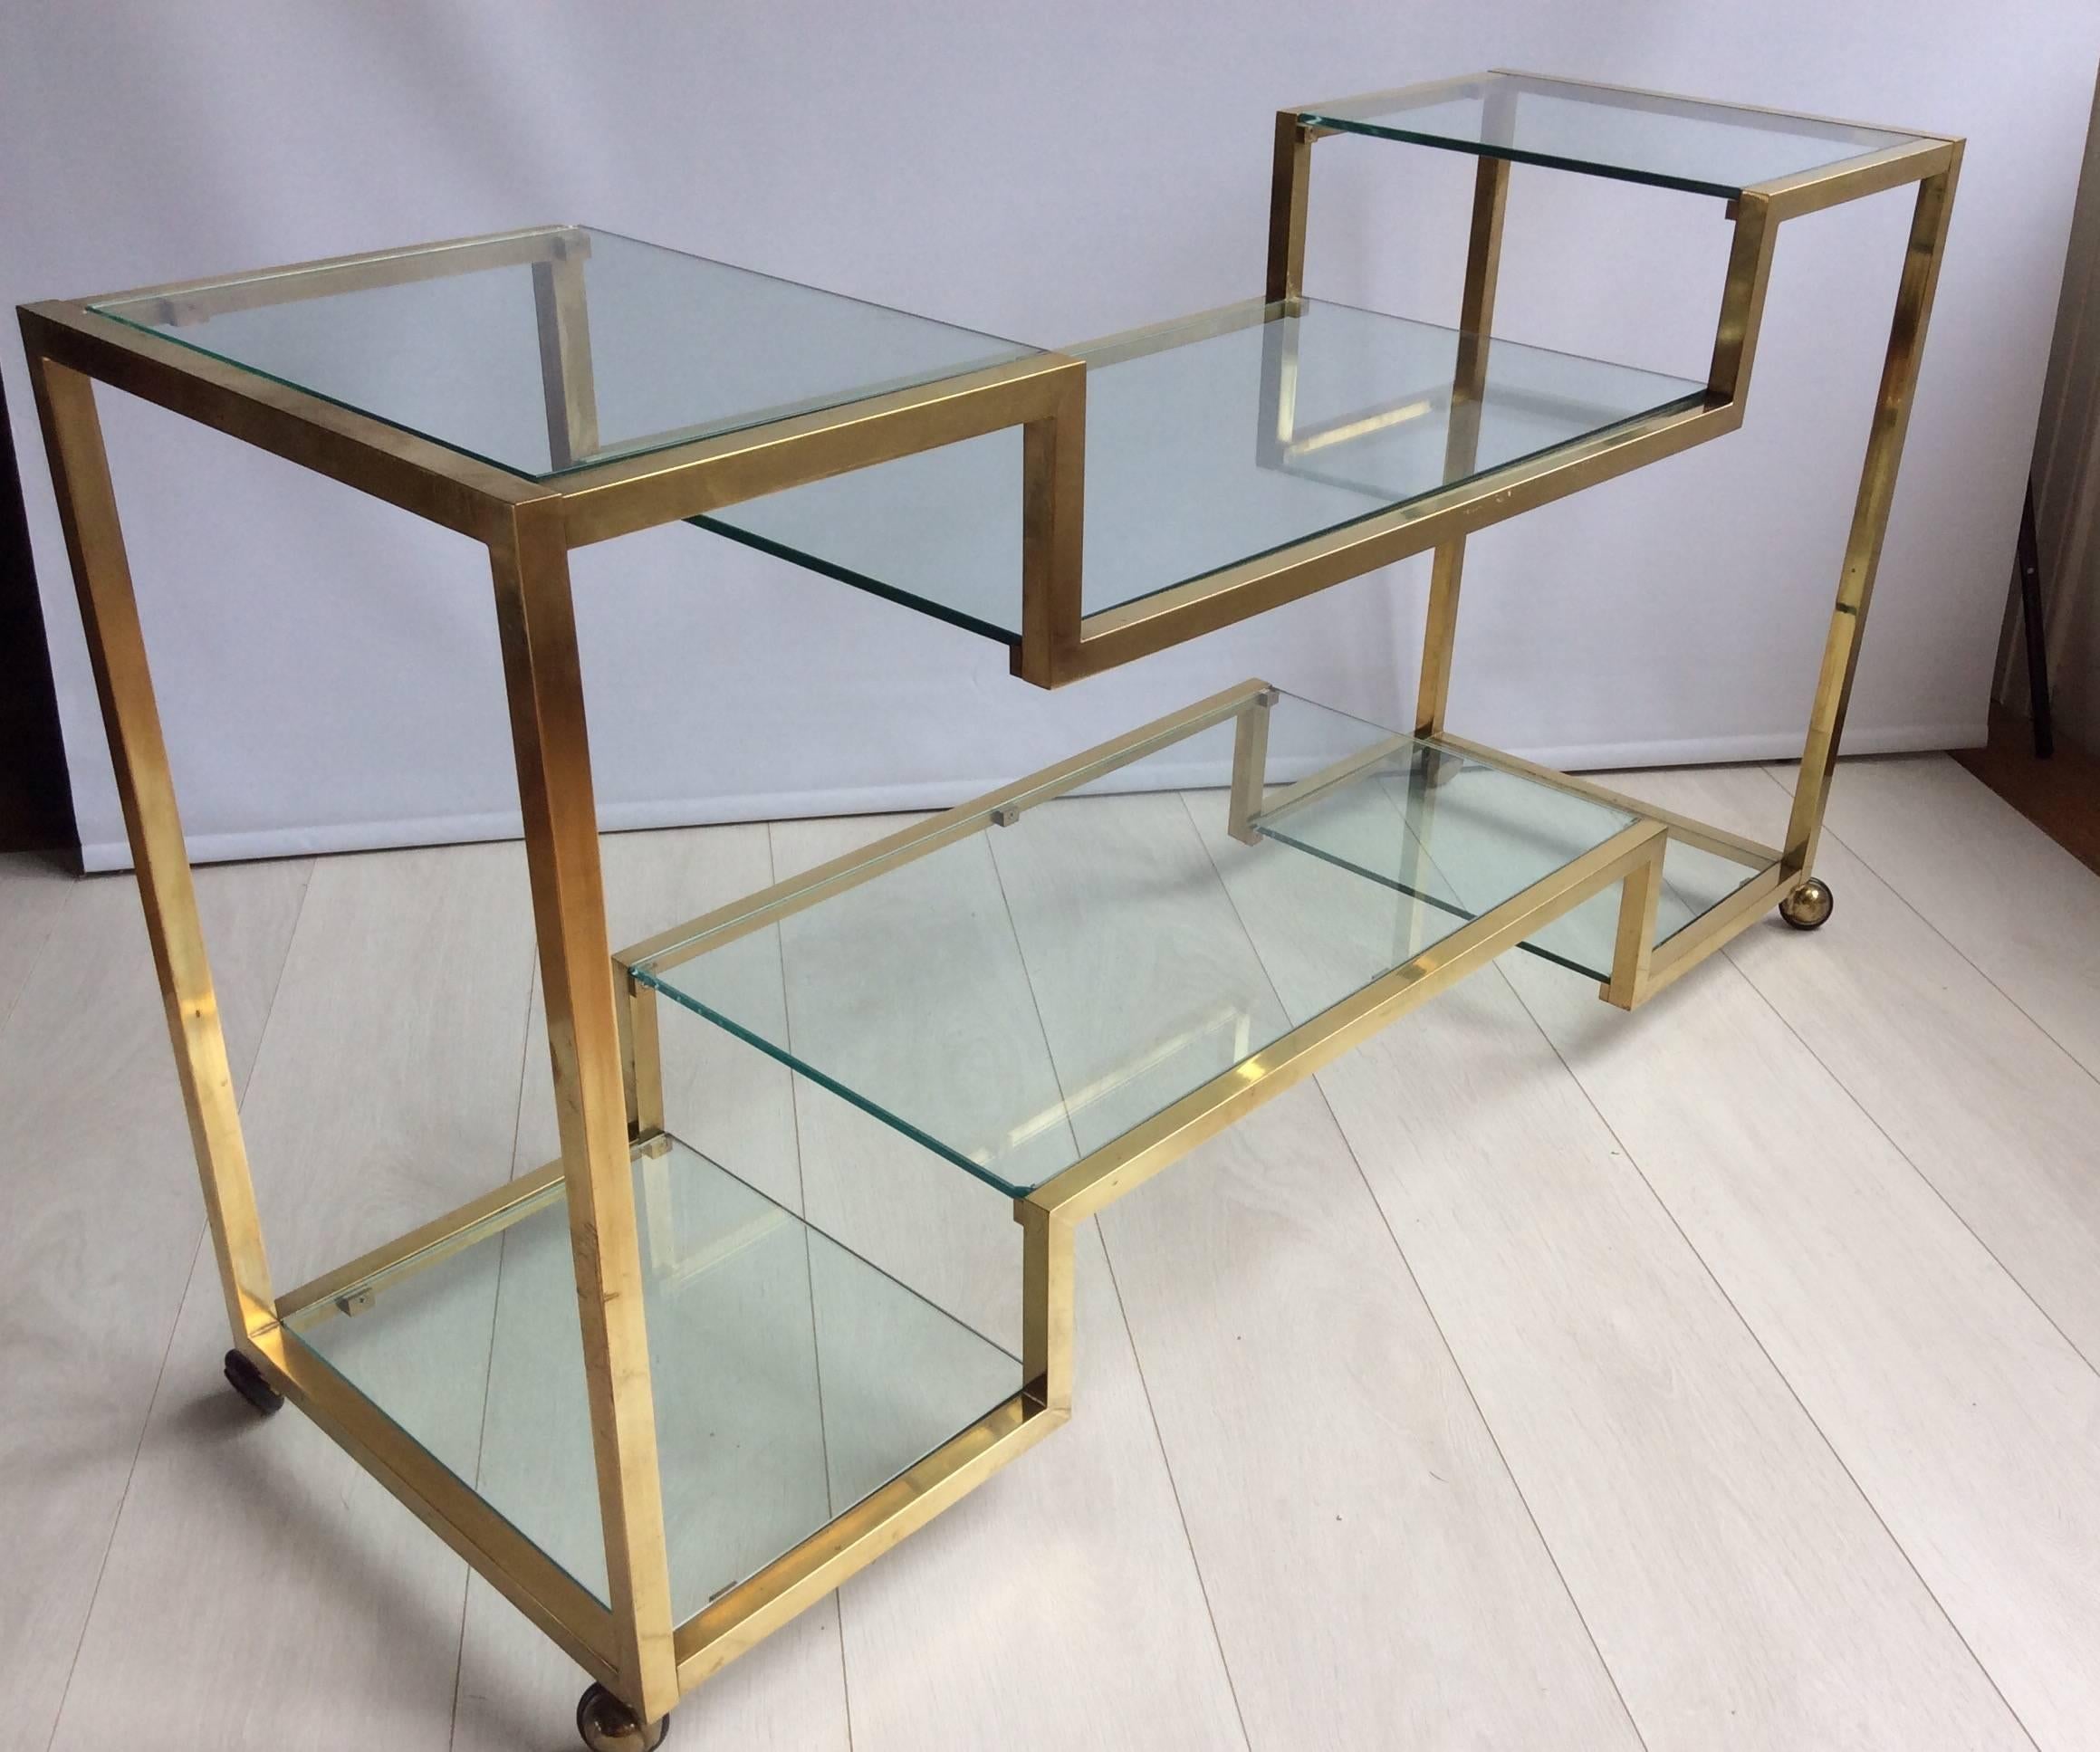 Beautiful tiered vintage brass-plated console on castors.

Aged patina.